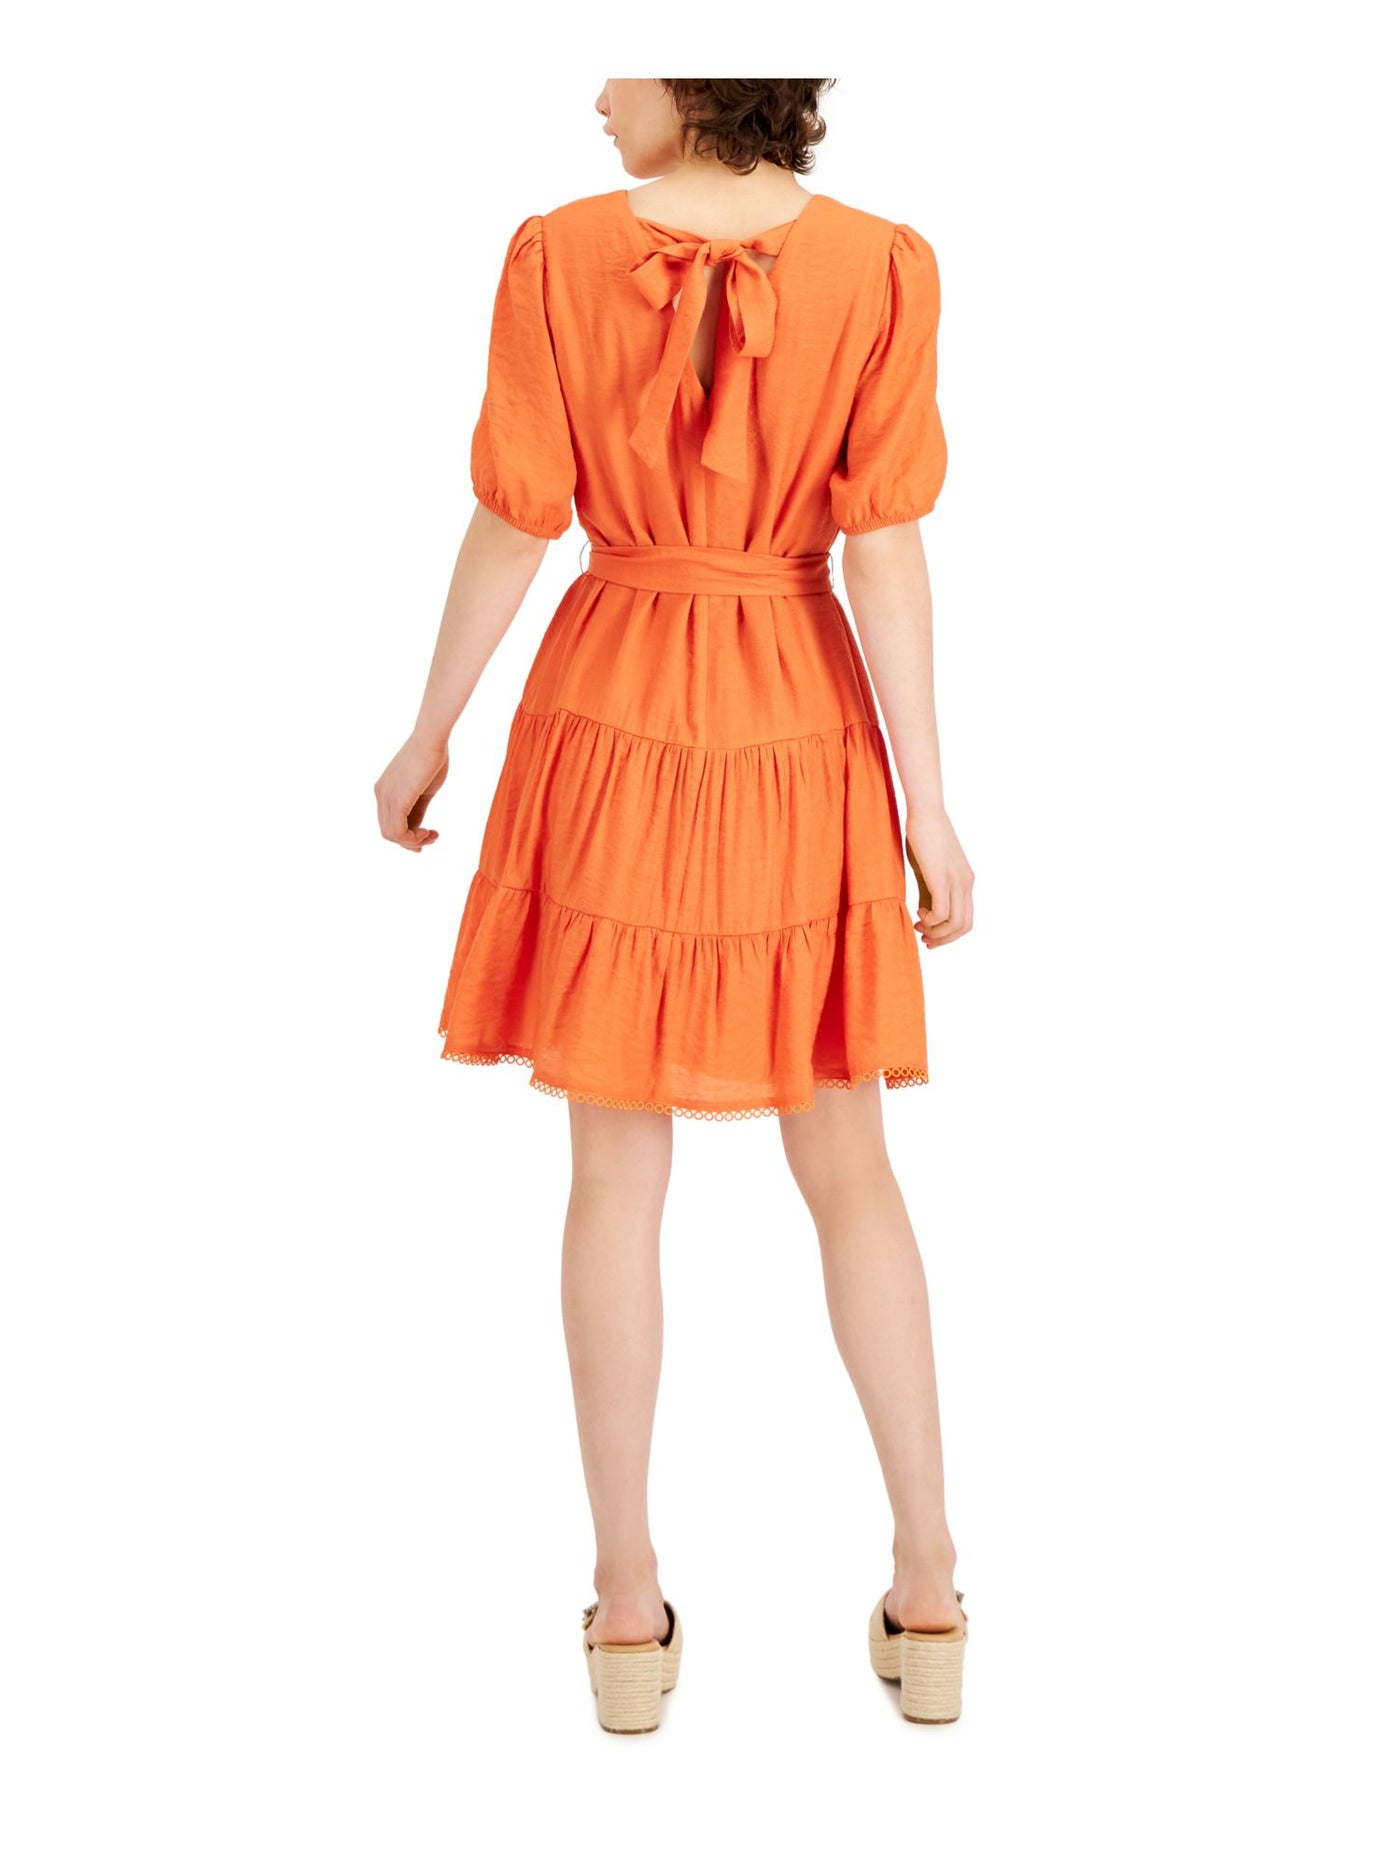 INC DRESSES Womens Orange Zippered Embellished Tiered Tie Back And Waist Elbow Sleeve V Neck Above The Knee A-Line Dress M